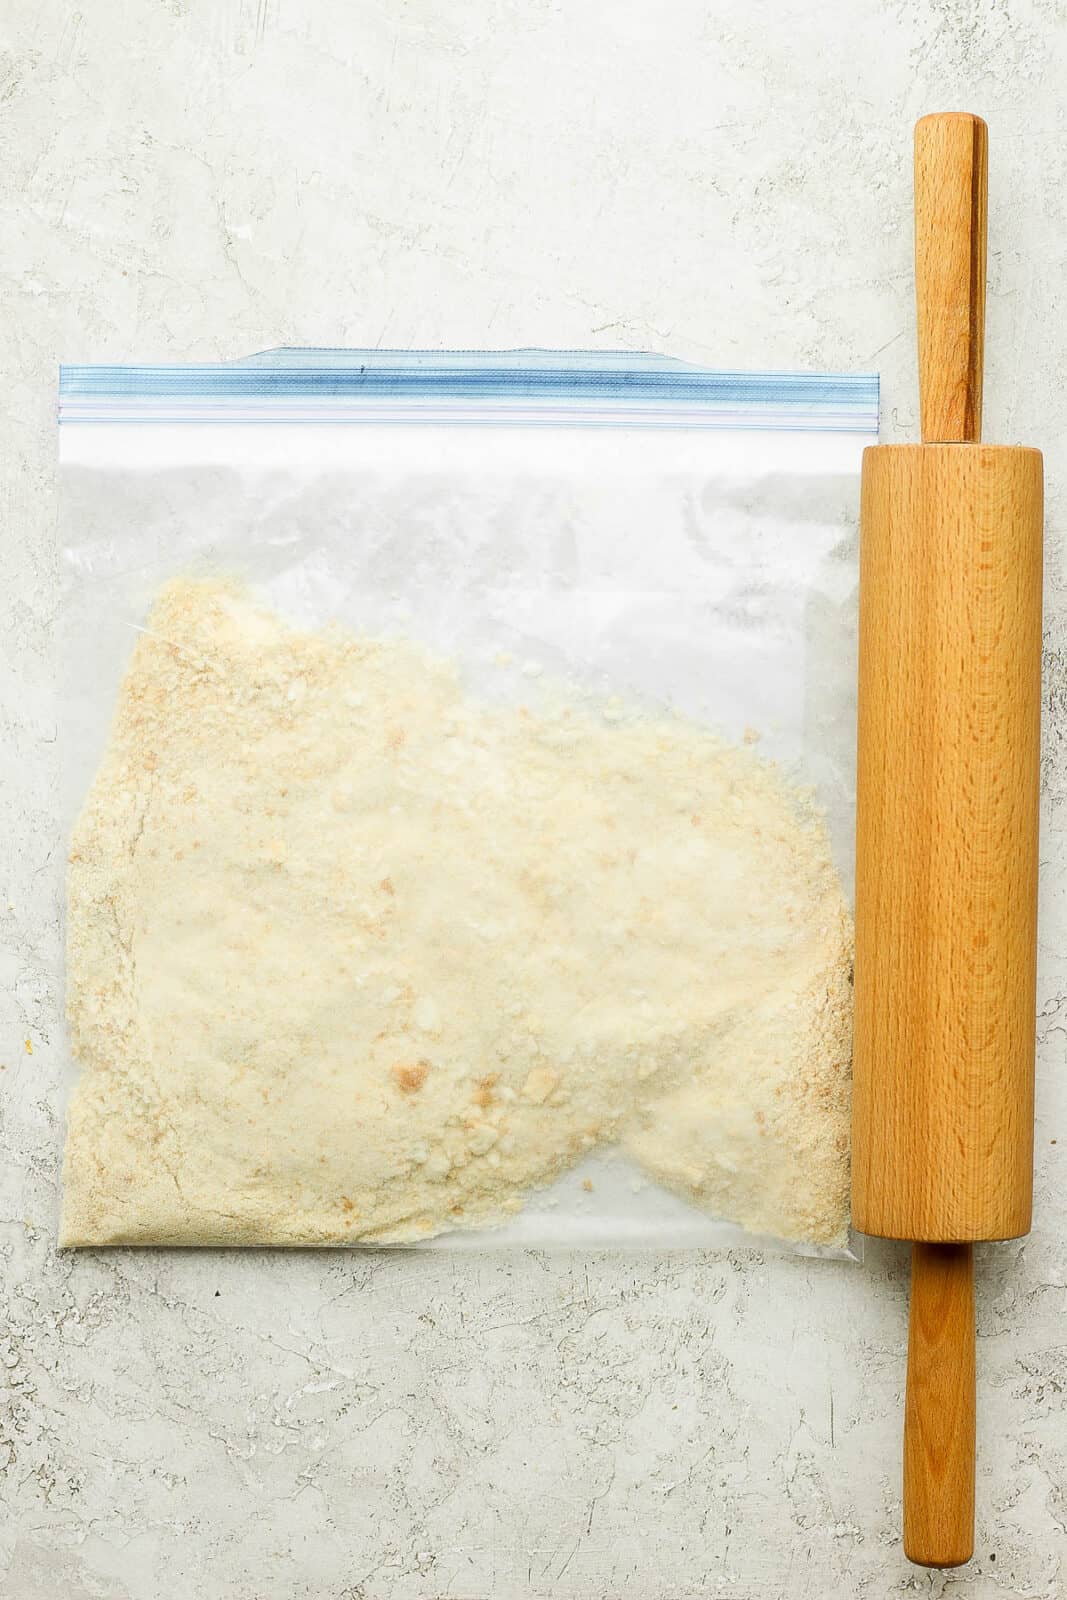 Breadcrumbs in a sealed ziplock bag with a rolling pin next to it. 